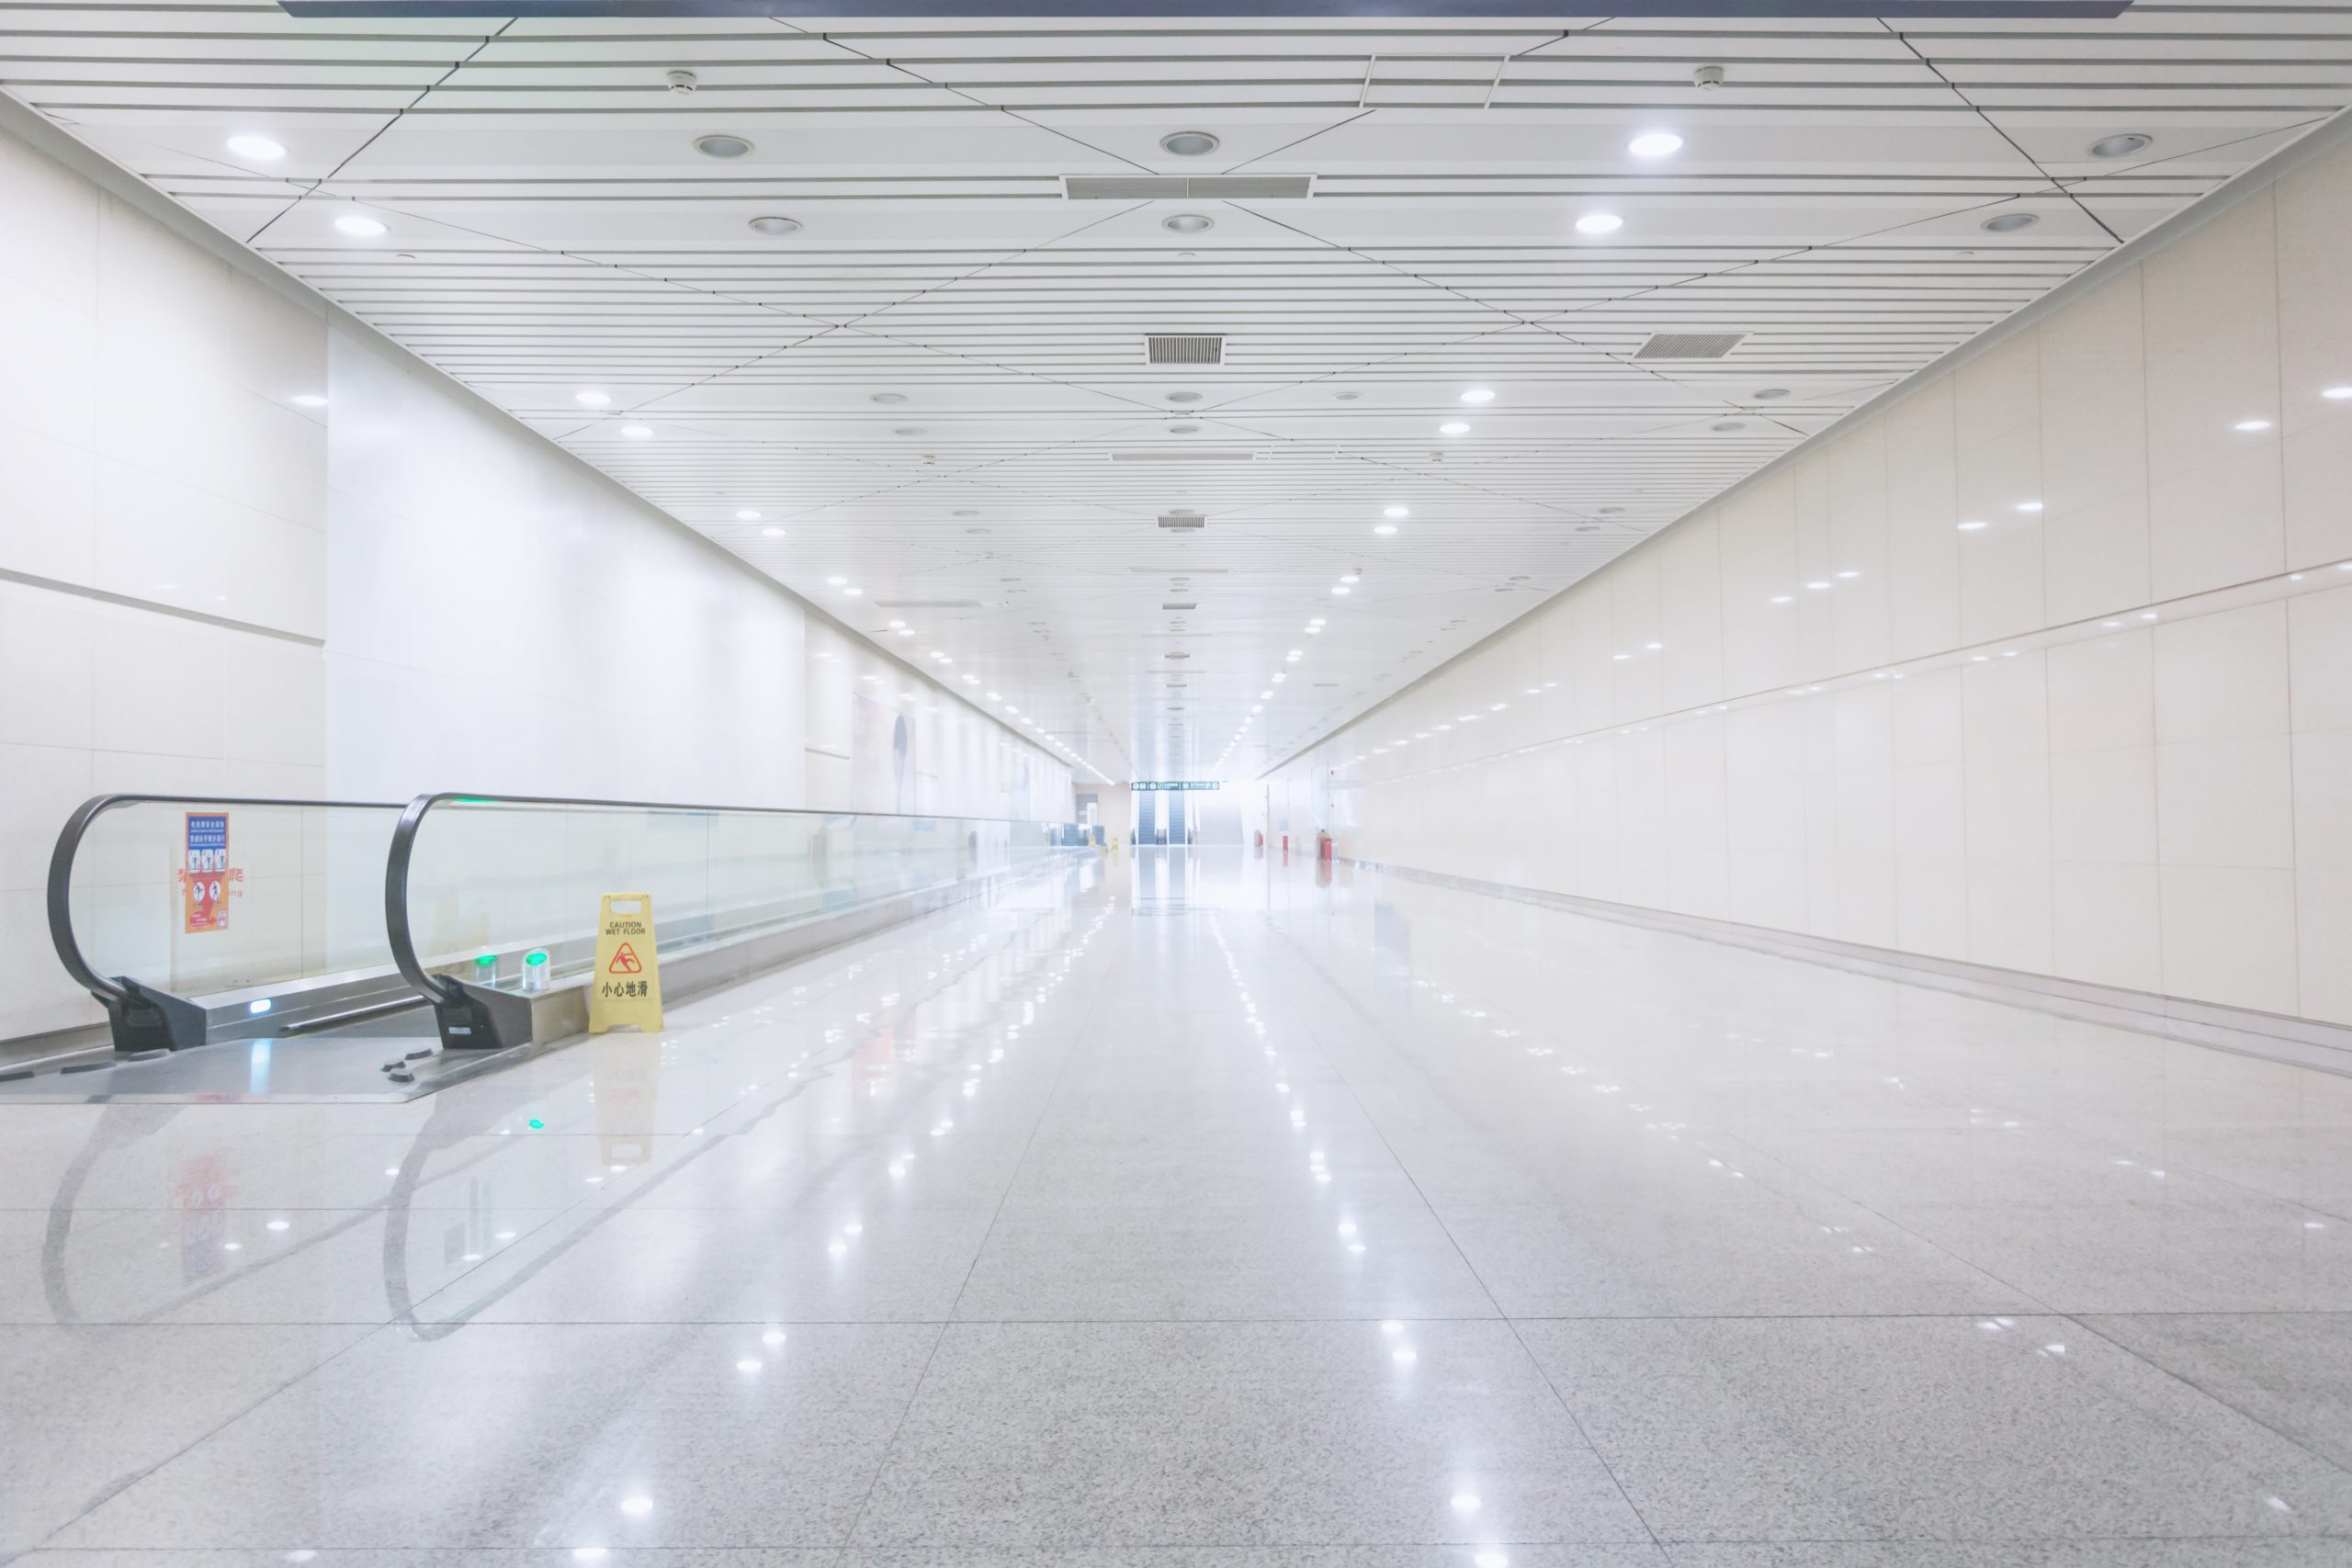 wide-hallway-with-moving-walkway-scaled-1.jpg